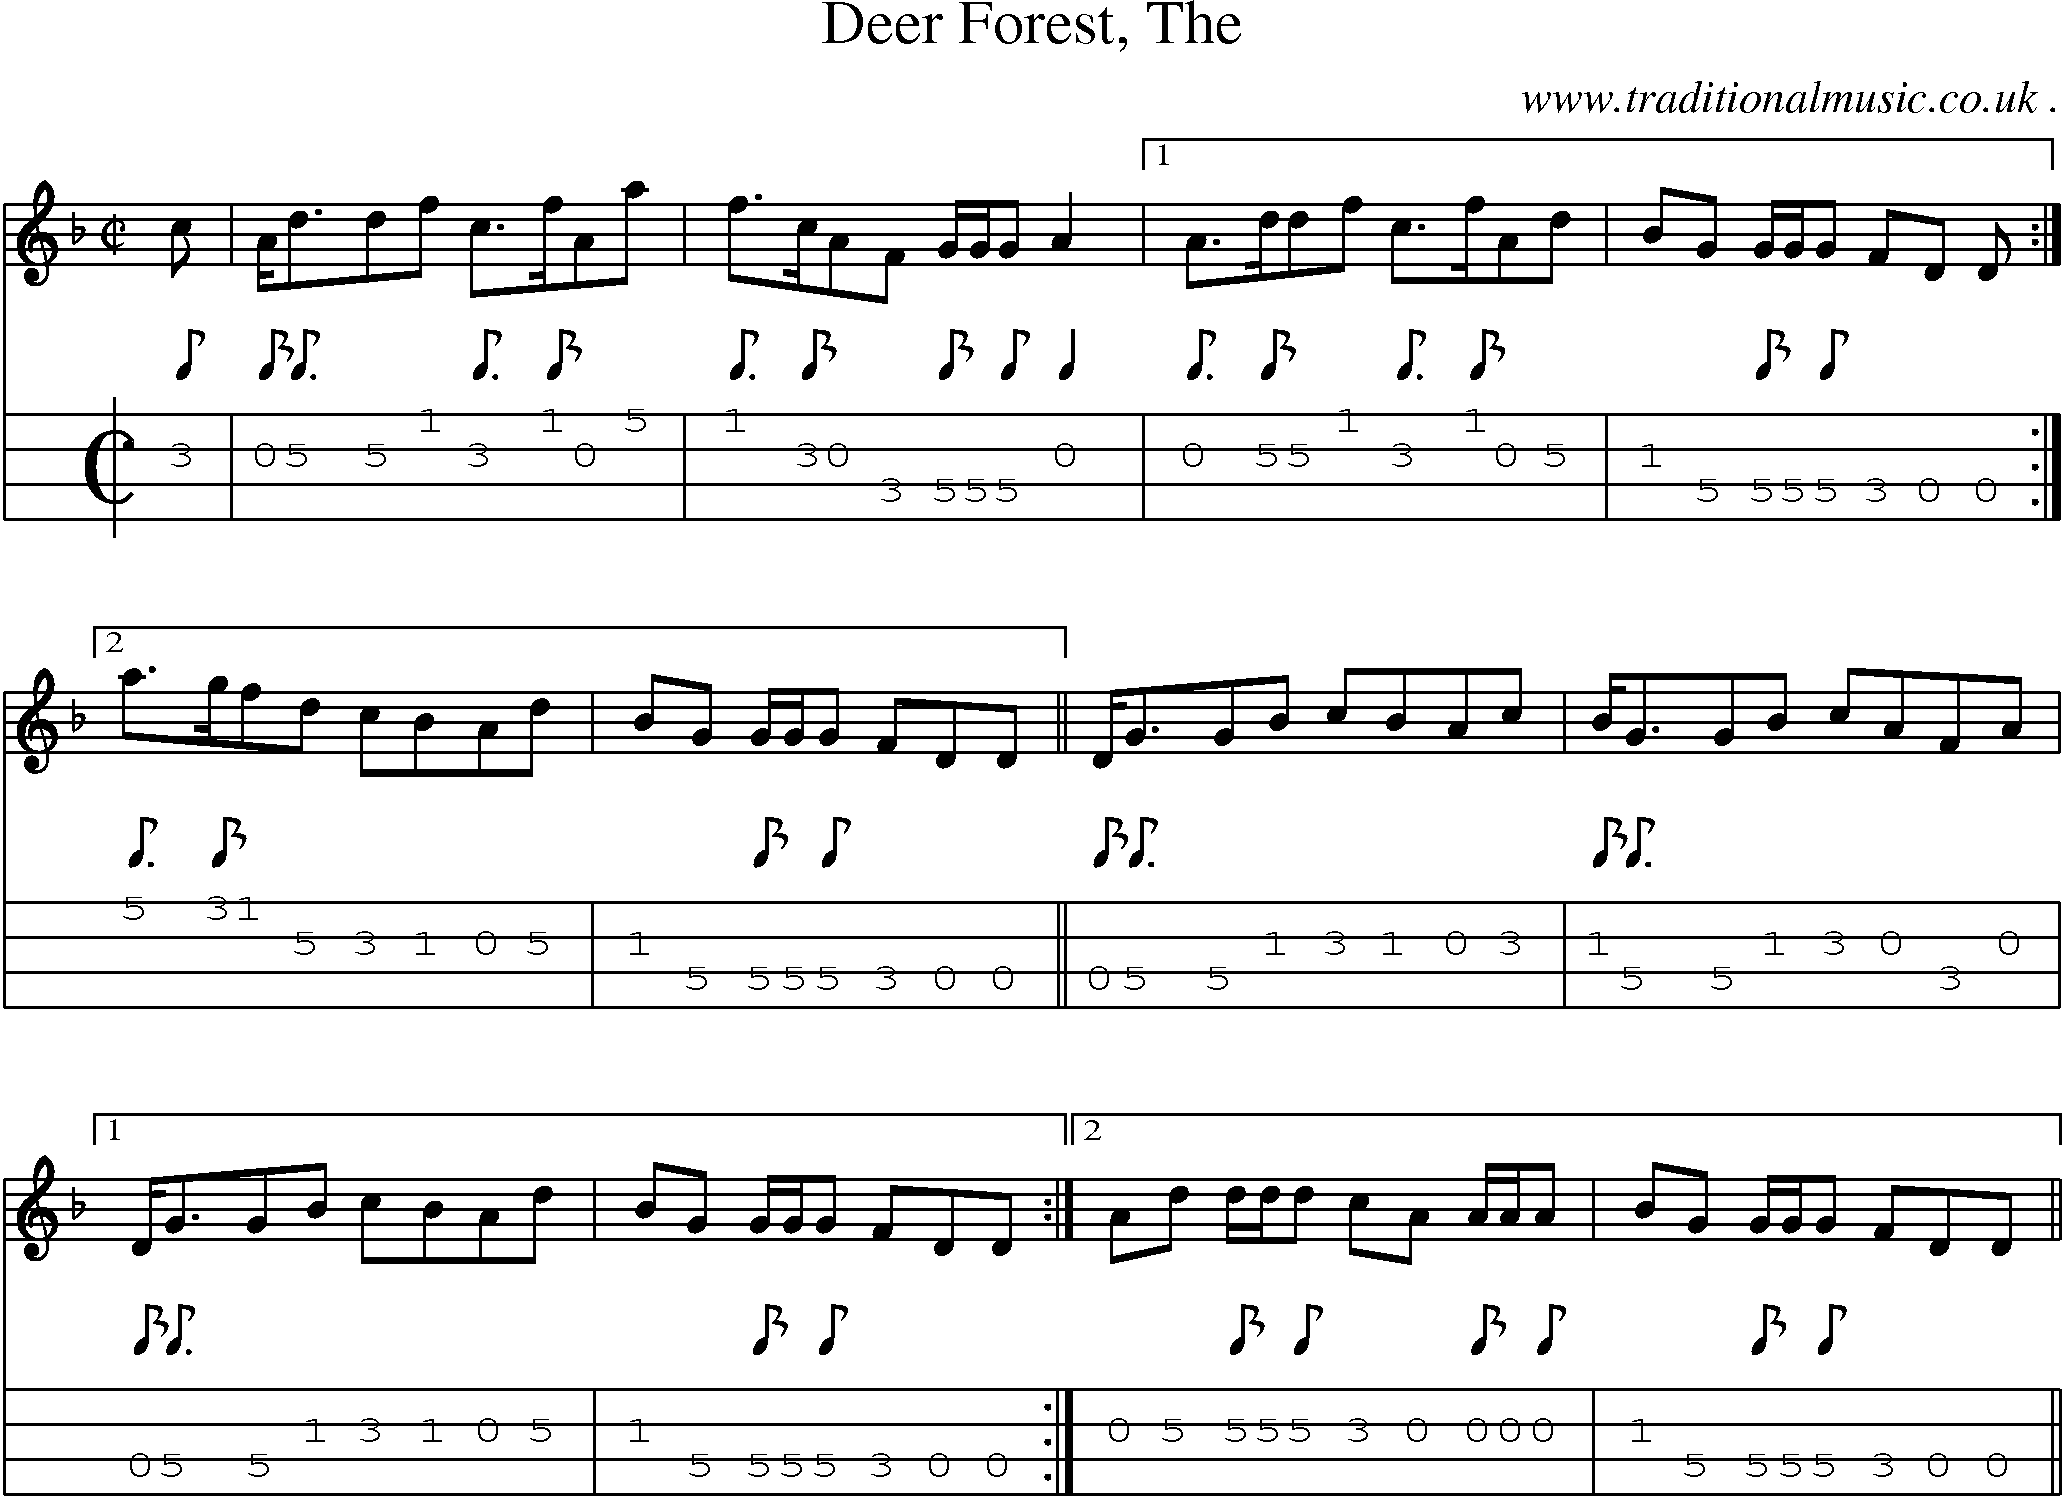 Sheet-music  score, Chords and Mandolin Tabs for Deer Forest The